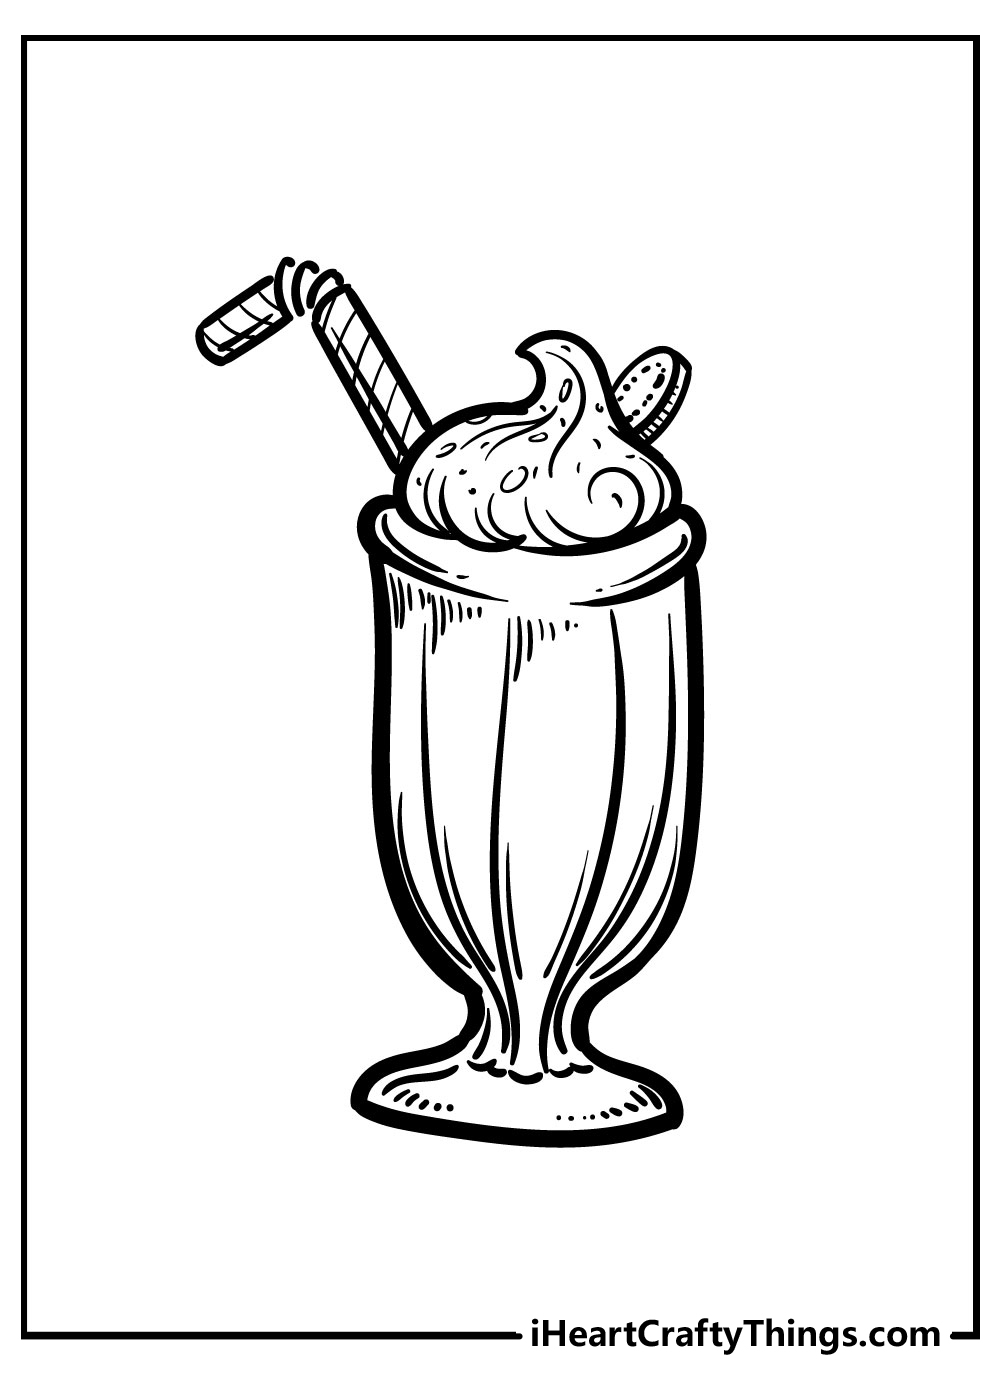 kawaii ice cream coloring pages